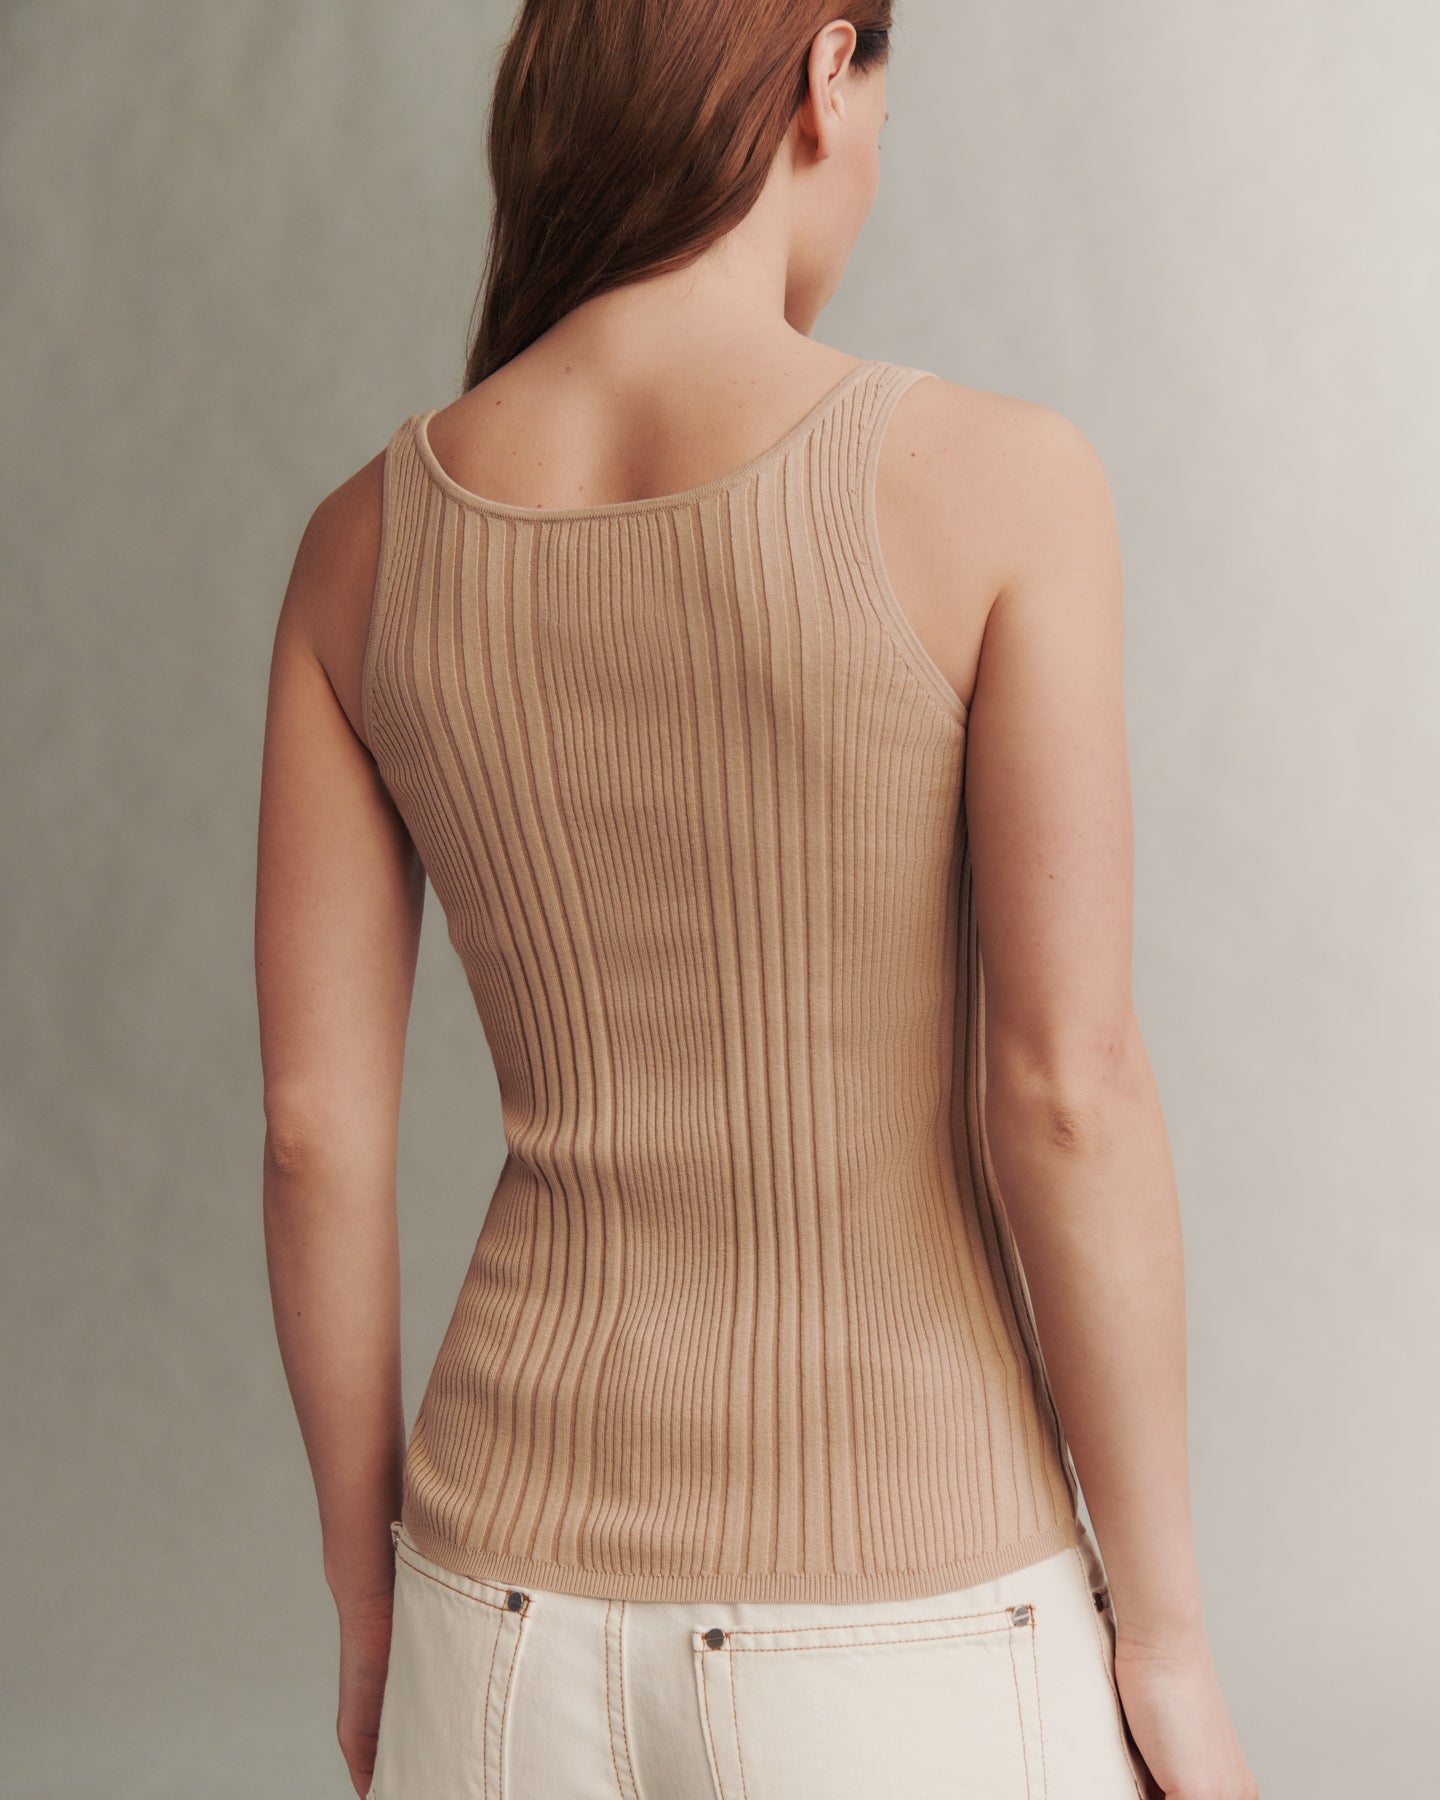 TWP Tan Second Base Top in Silk & Cotton view 4